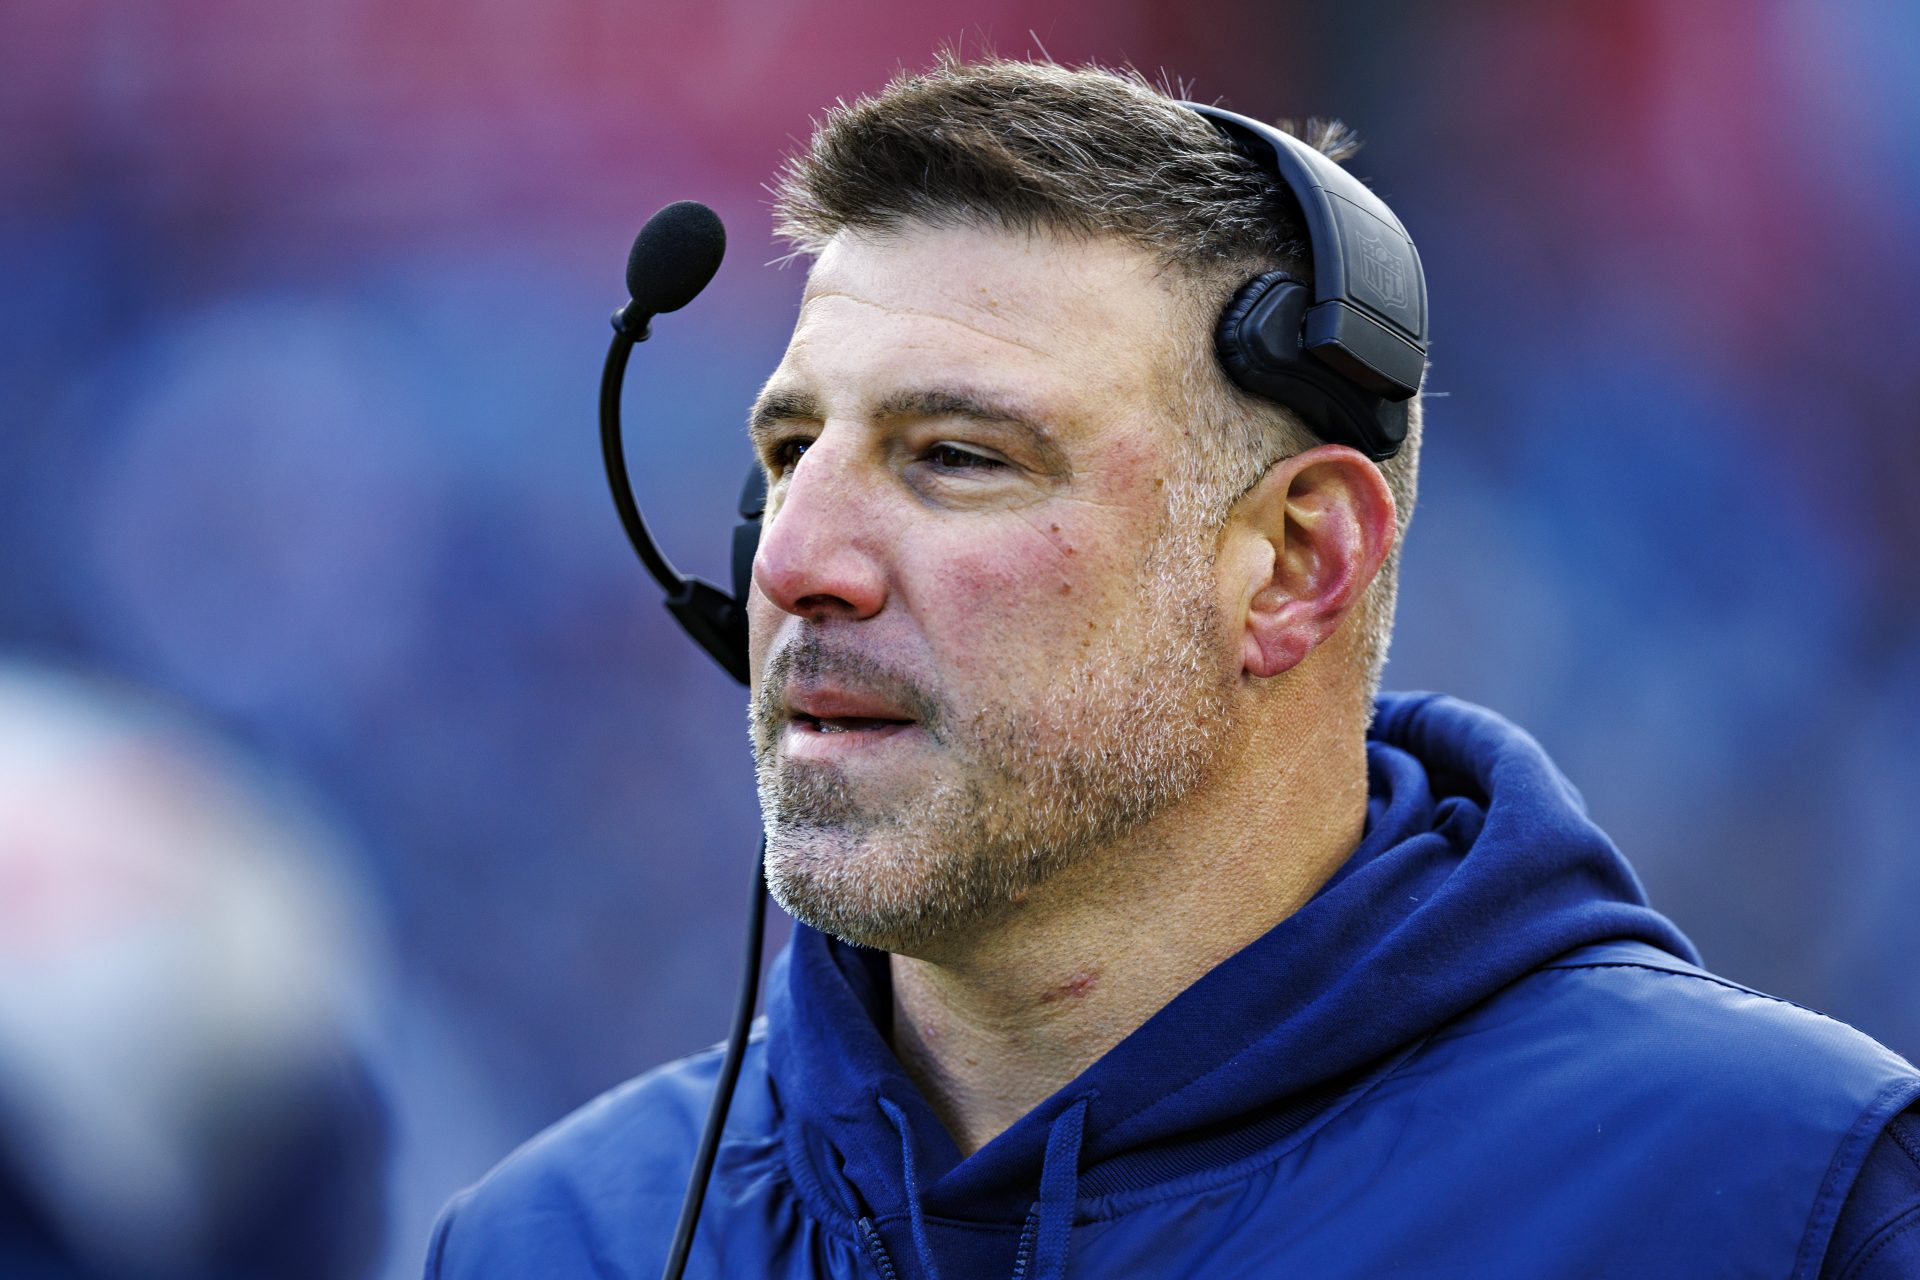 The bizarre reason why Mike Vrabel is struggling to get a new coaching role